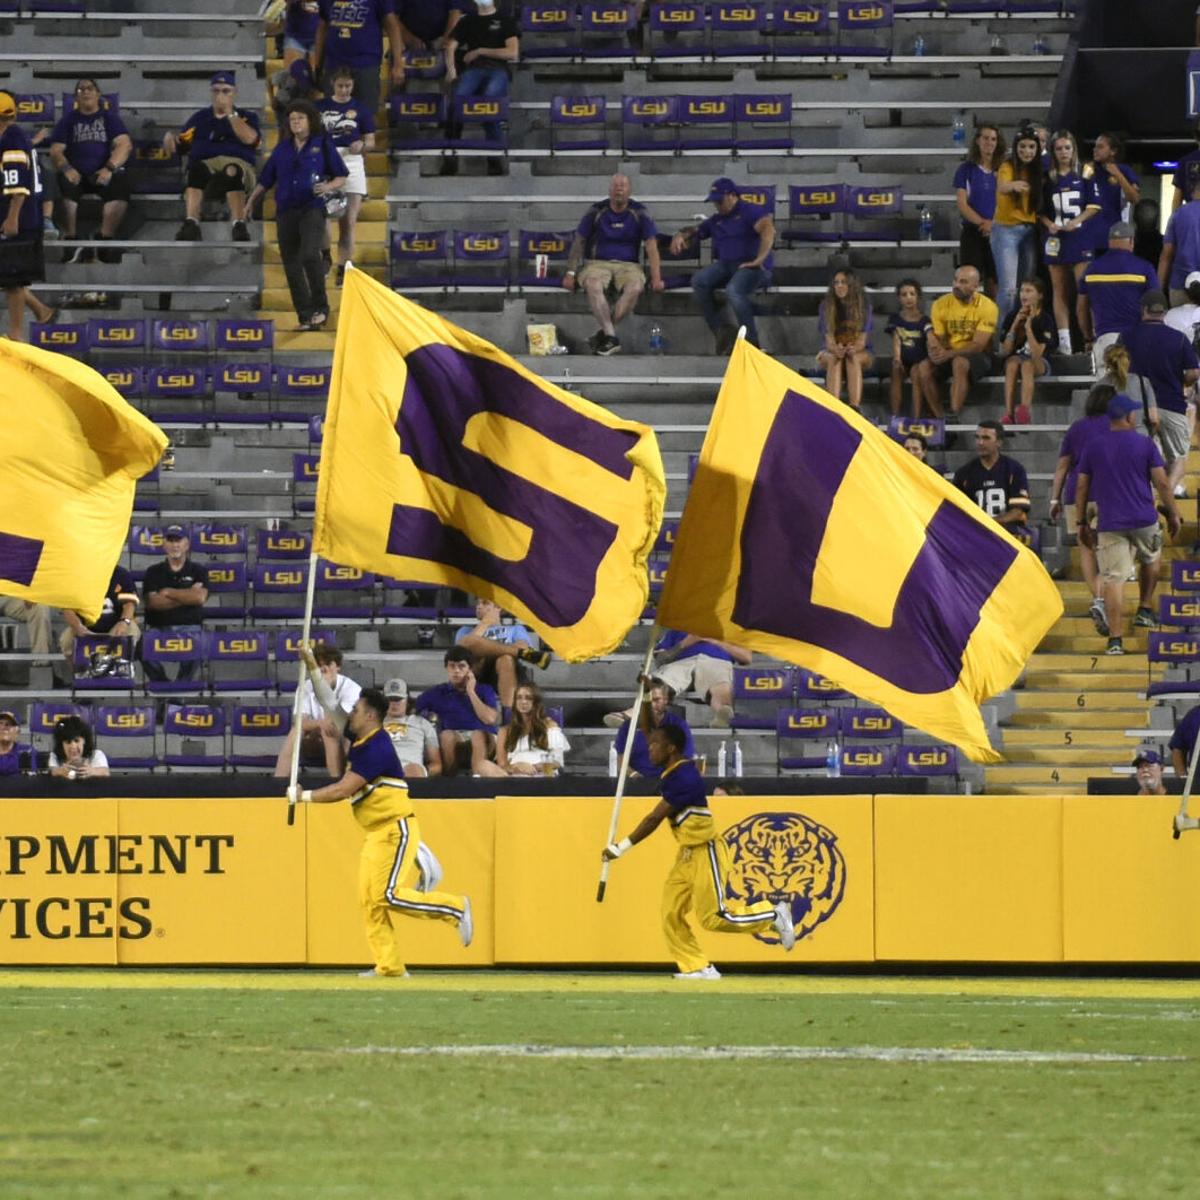 Lsu Football Schedule 2022 23 Ready For 2022? Lsu Football Schedule Released; See The Tigers' Key Dates,  Opponents | Lsu | Theadvocate.com